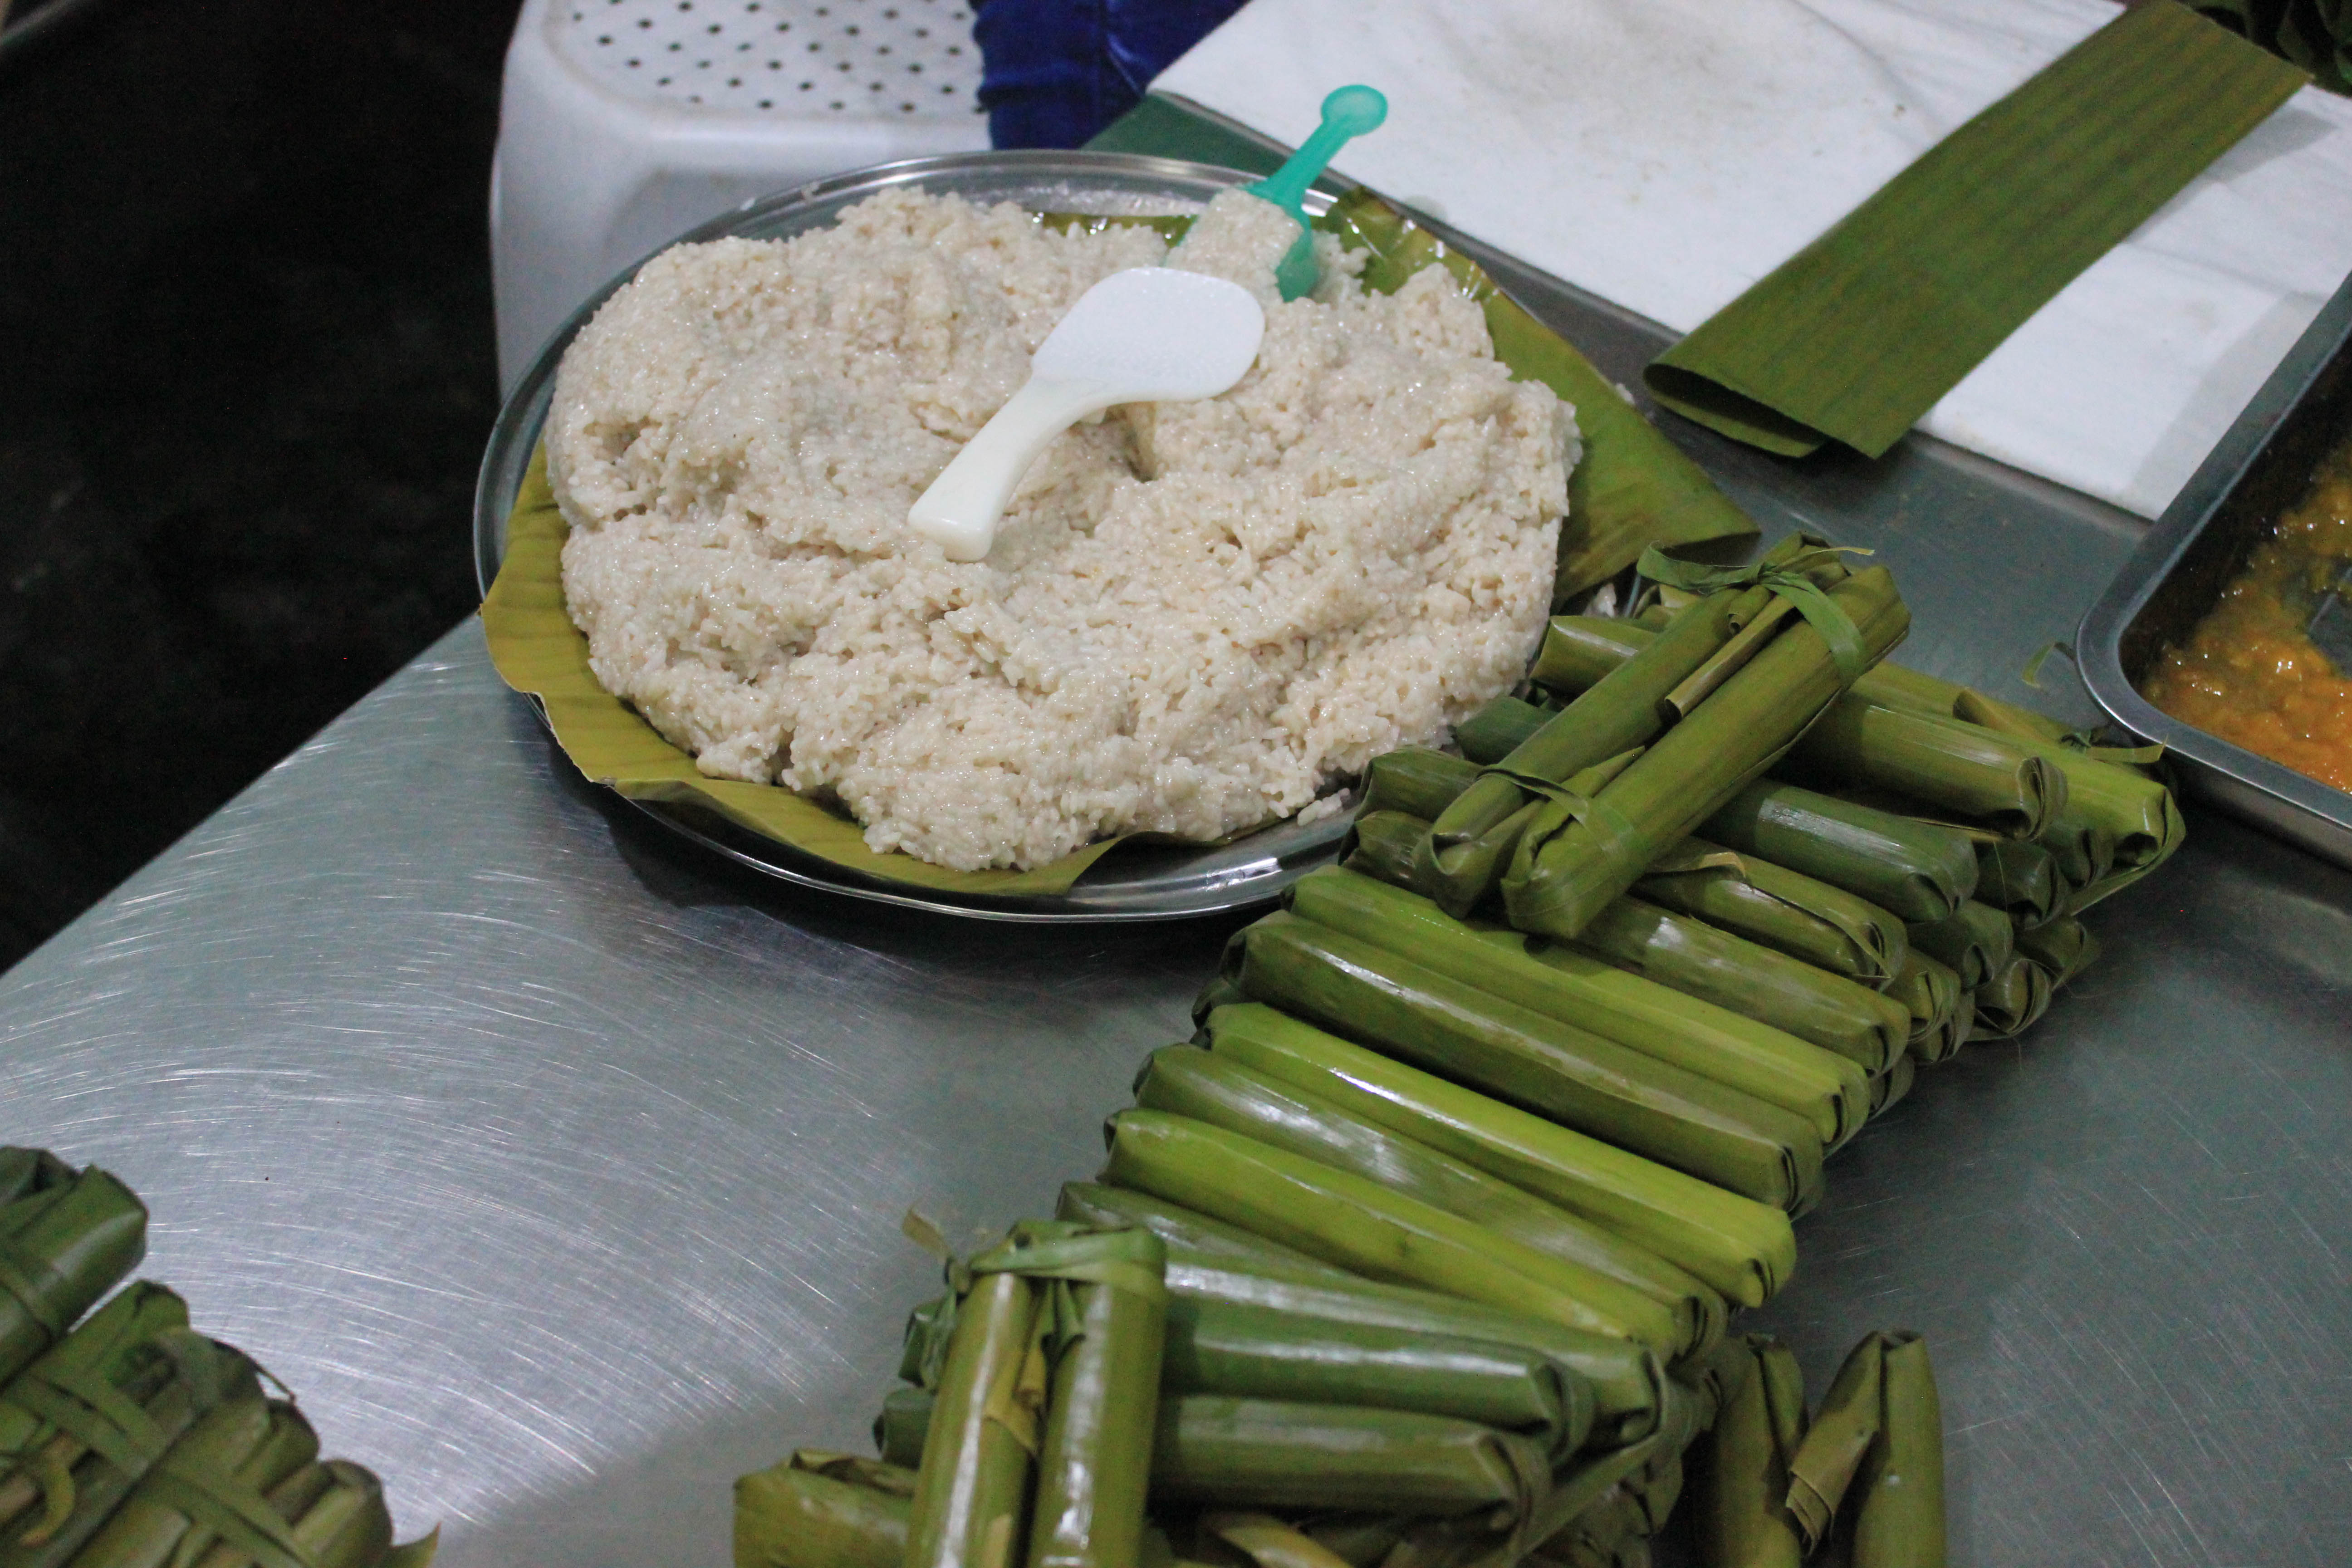 Suman, a popular Filipino delicacy, is rice cake wrapped in banana leaves.